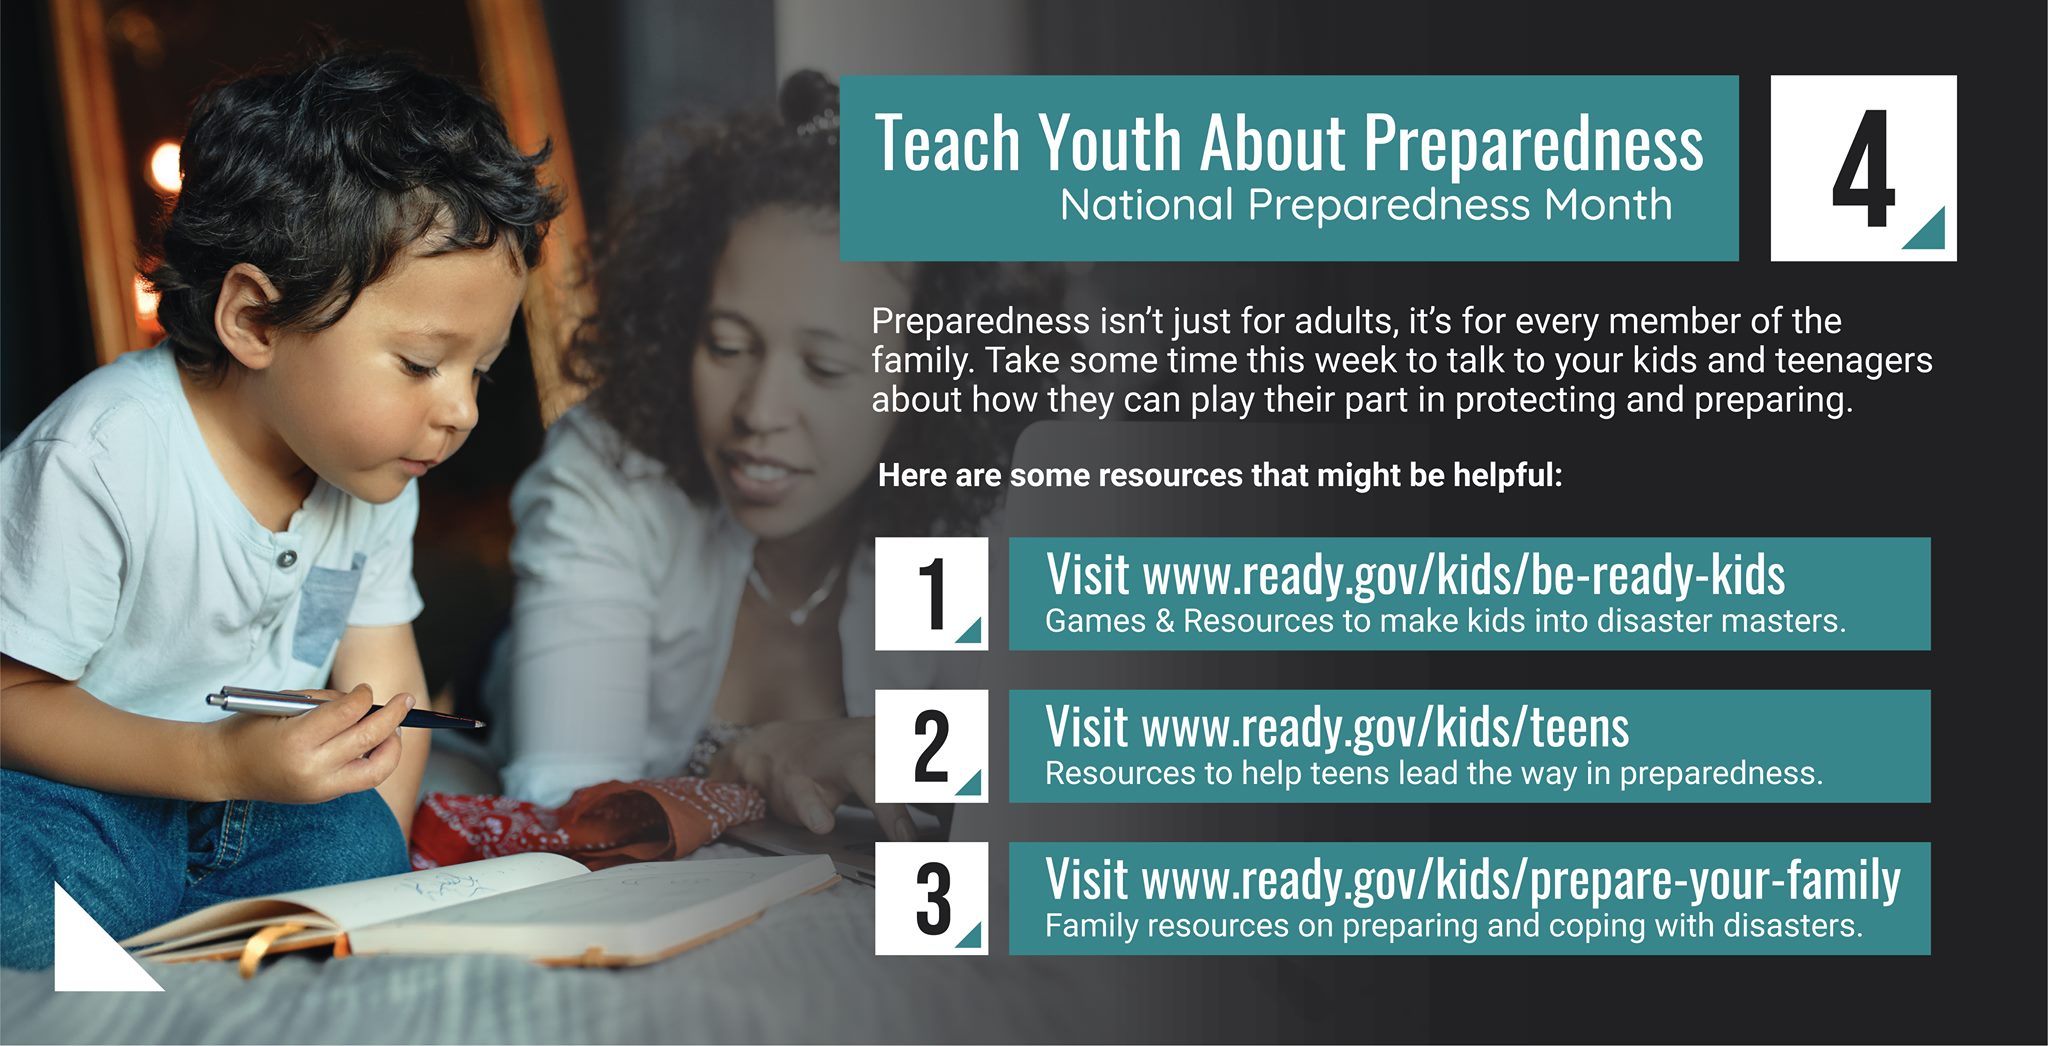 Teach youth about preparedness brochure